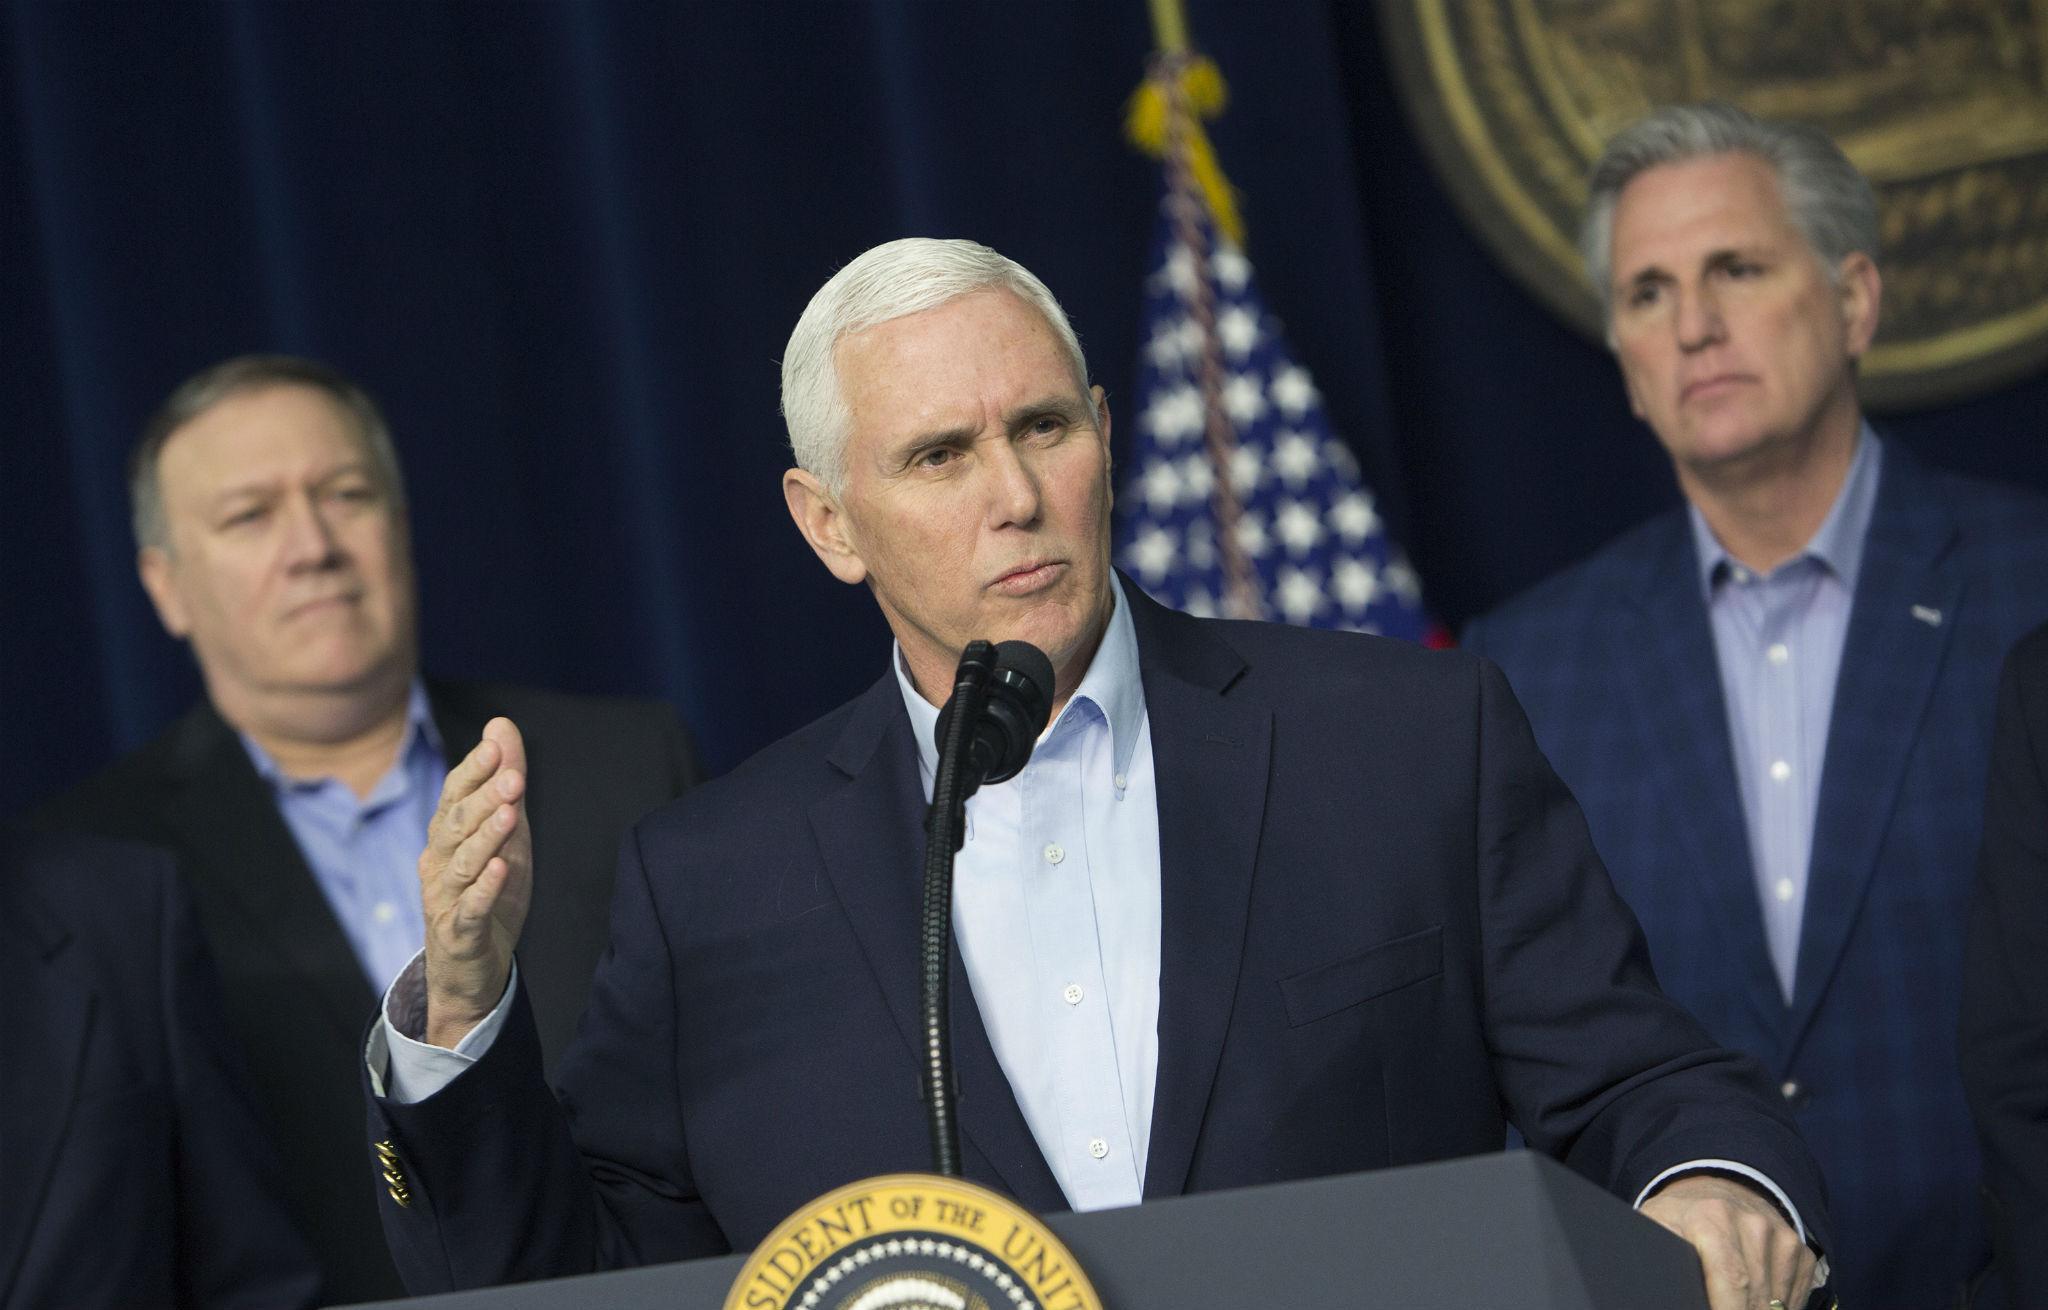 Vice President Mike Pence is preparing to embark on a cross-country campaign tour for Republican candidates in swing states